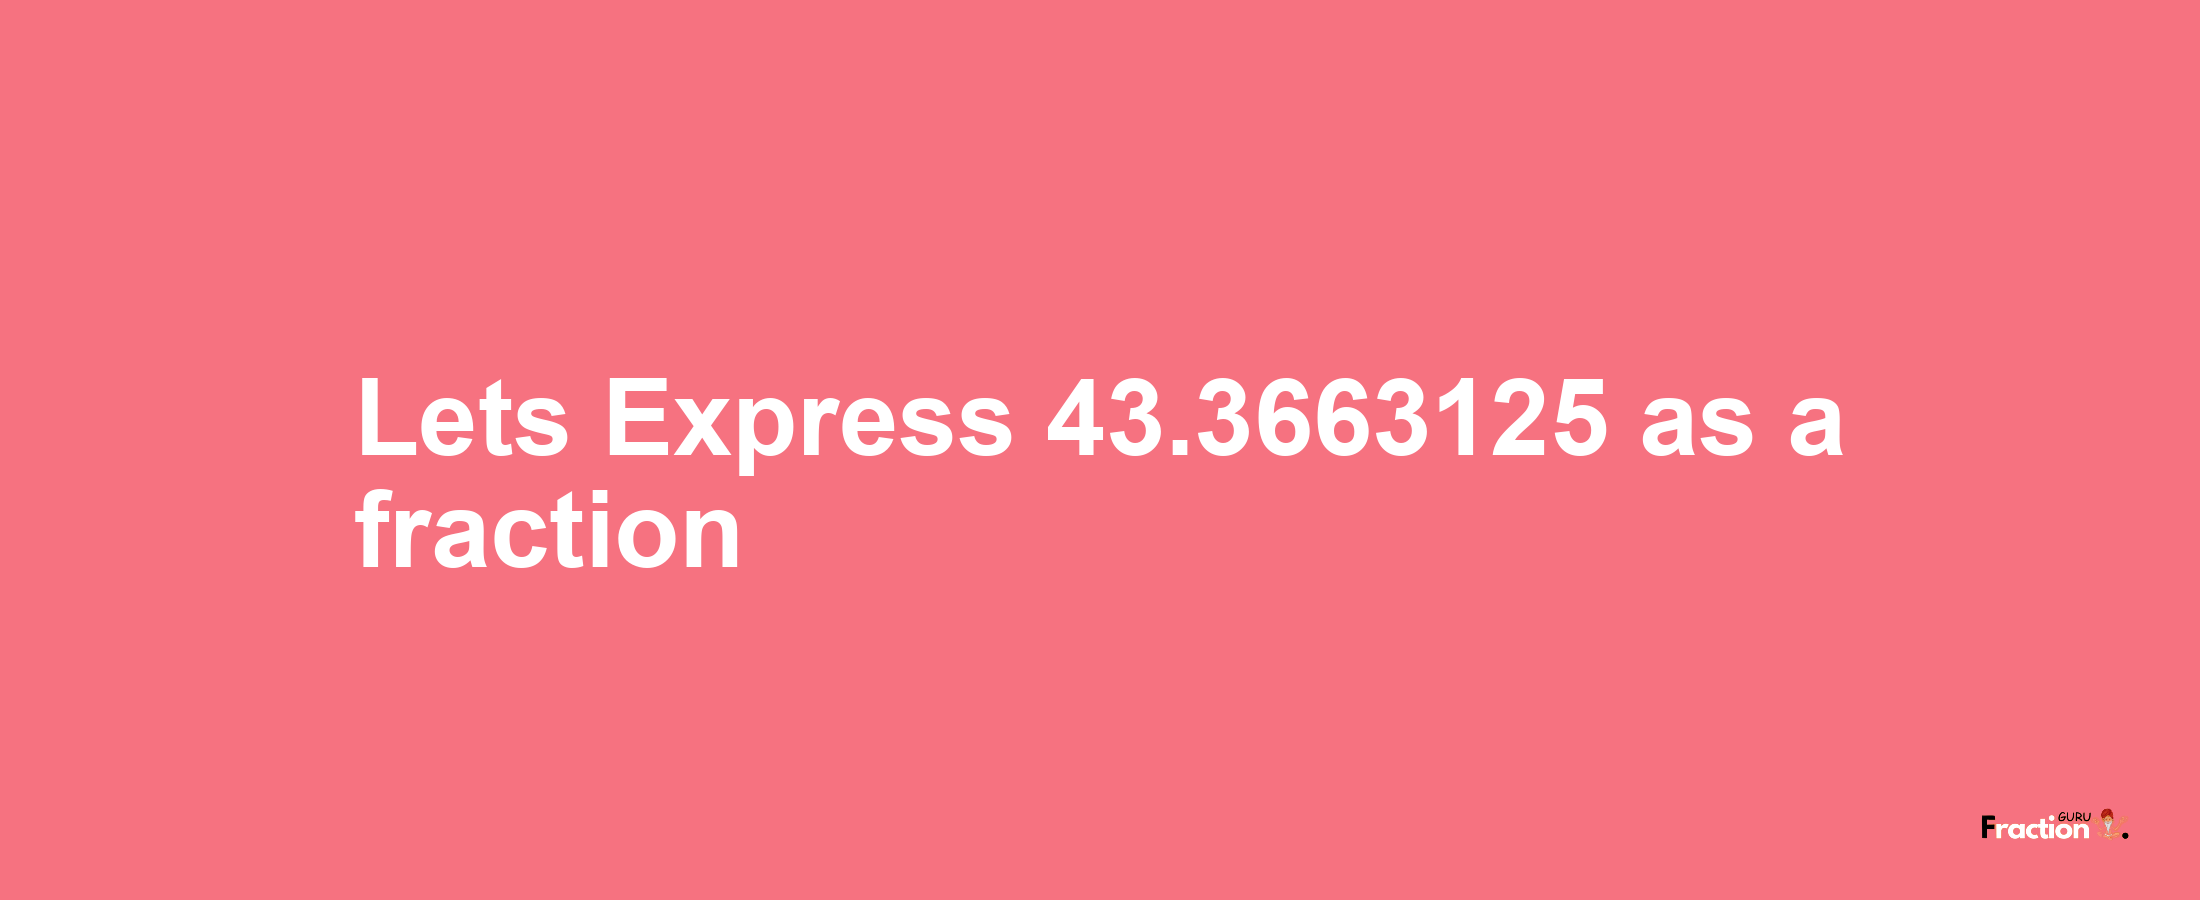 Lets Express 43.3663125 as afraction